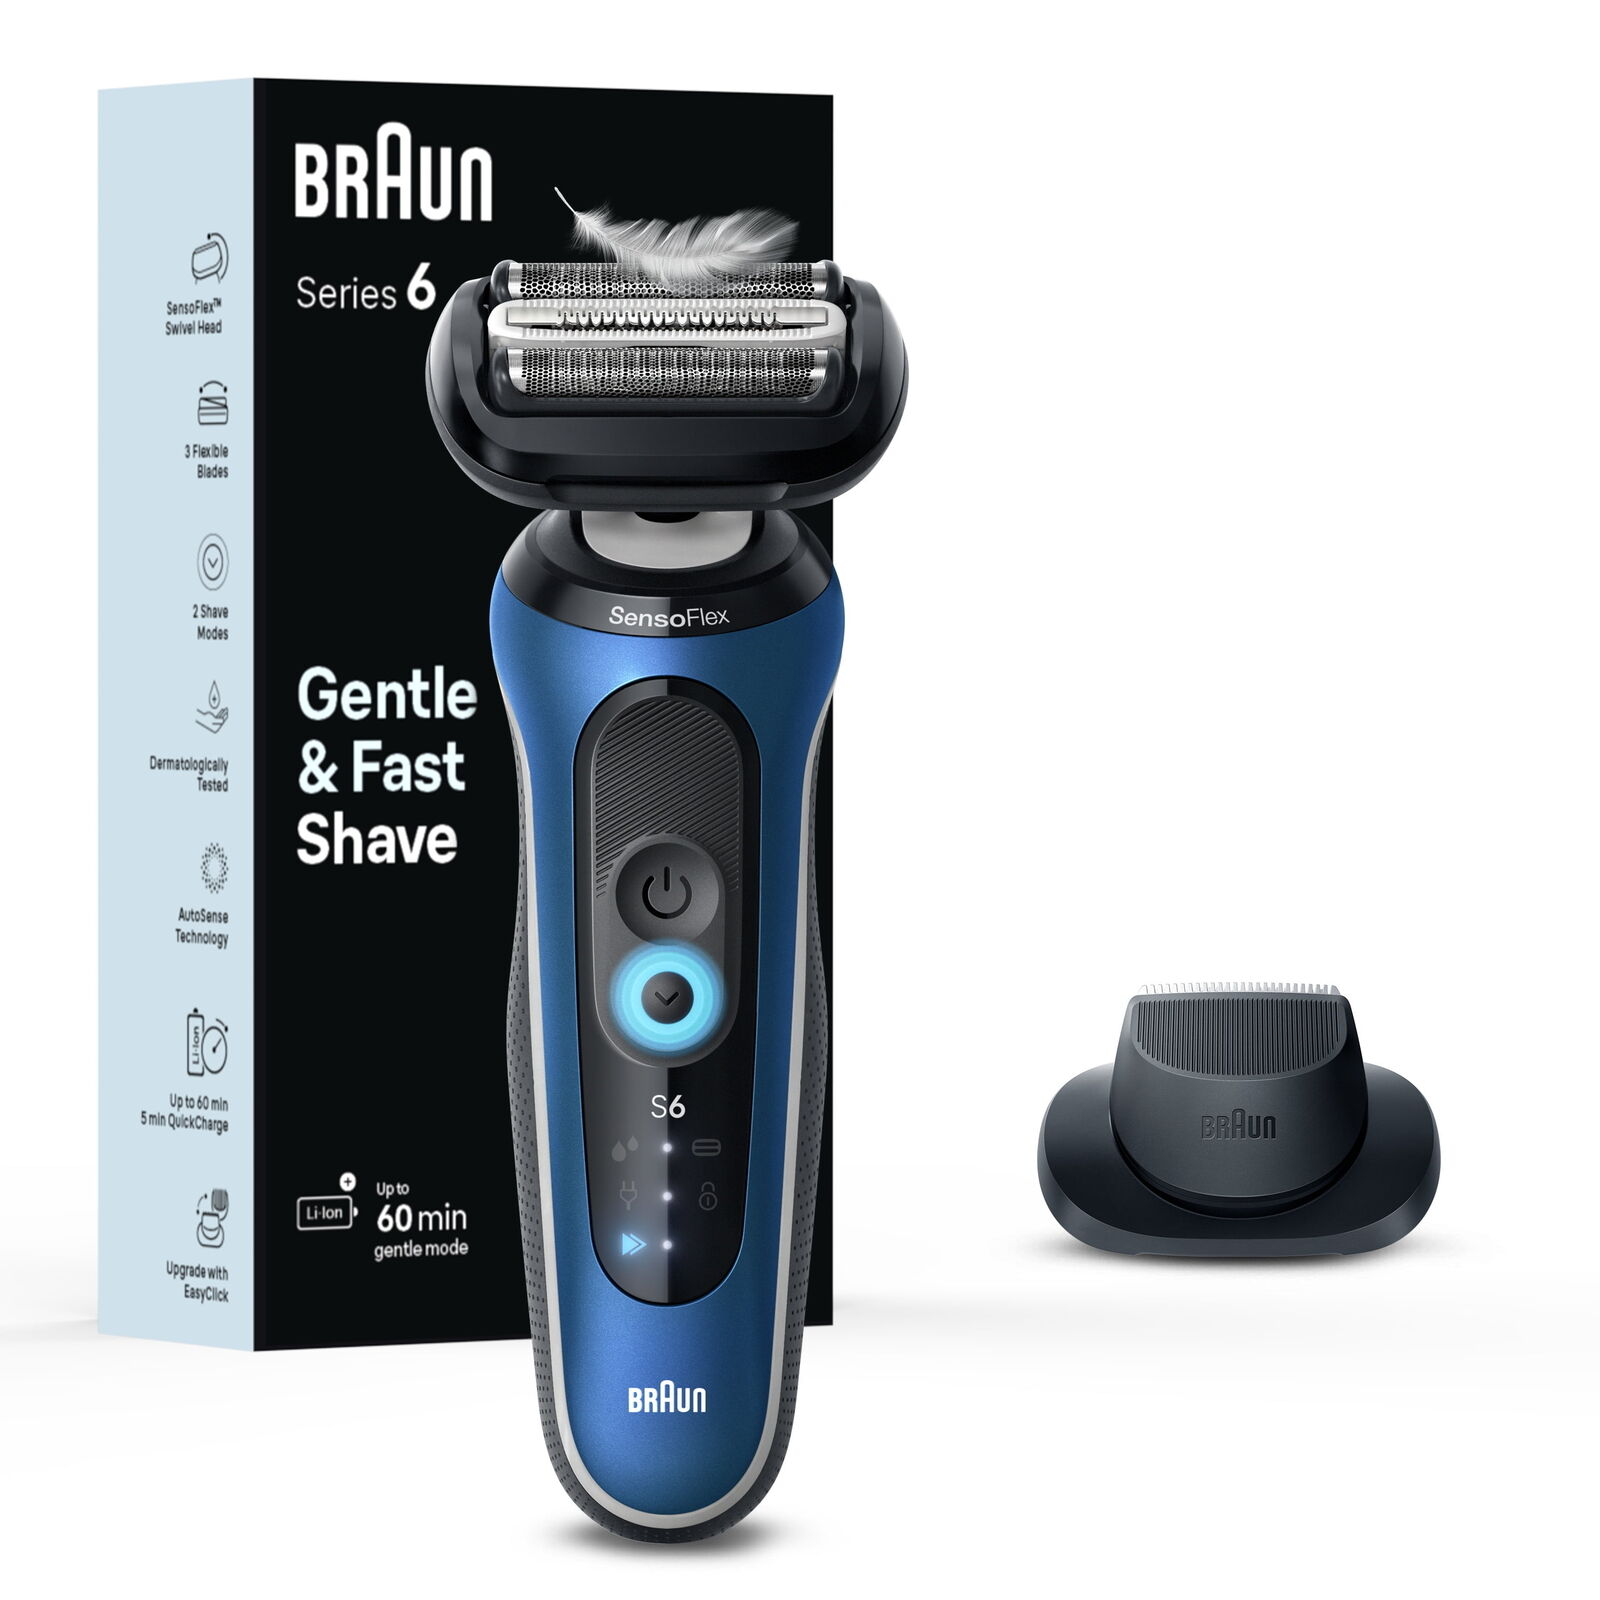 Braun Series 6 6120s Electric Shaver with Precision Trimmer and Pouch. Y09